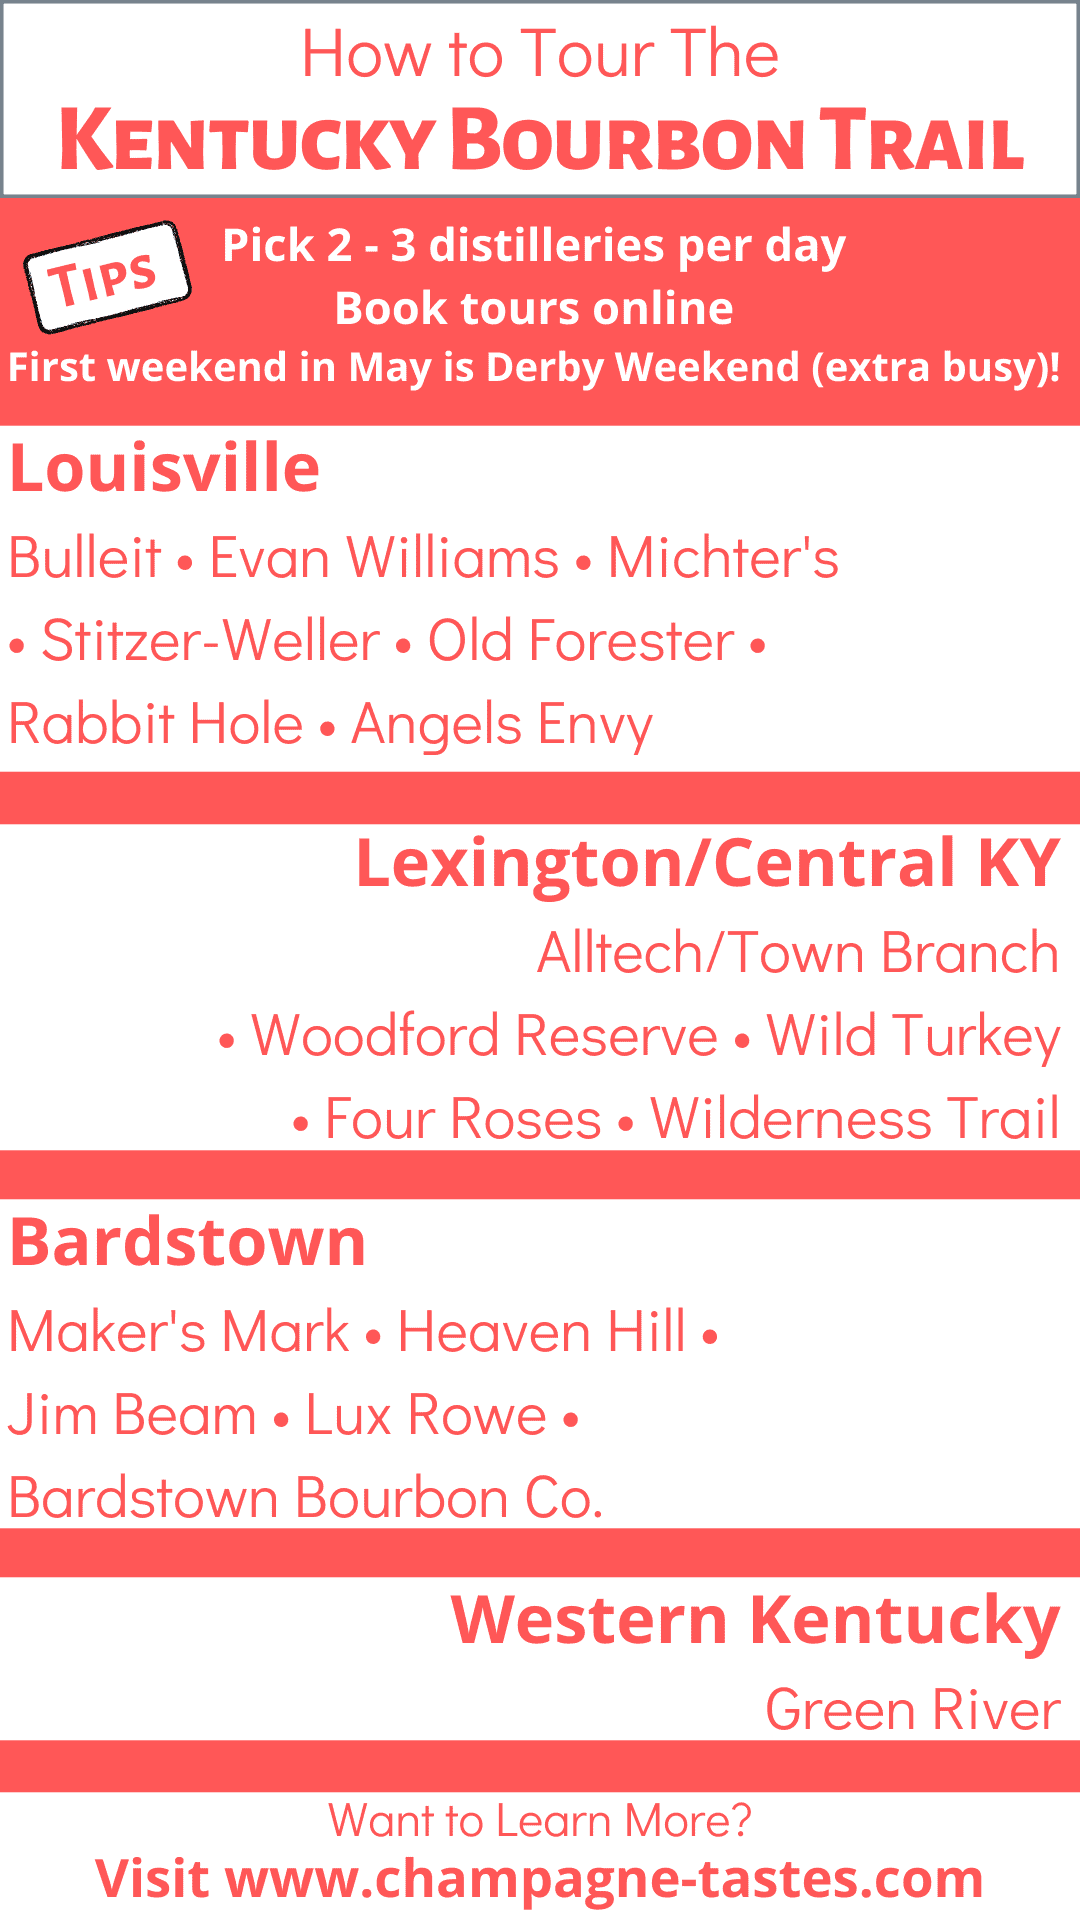 Graphic listing the distilleries on the Kentucky Bourbon Trail.